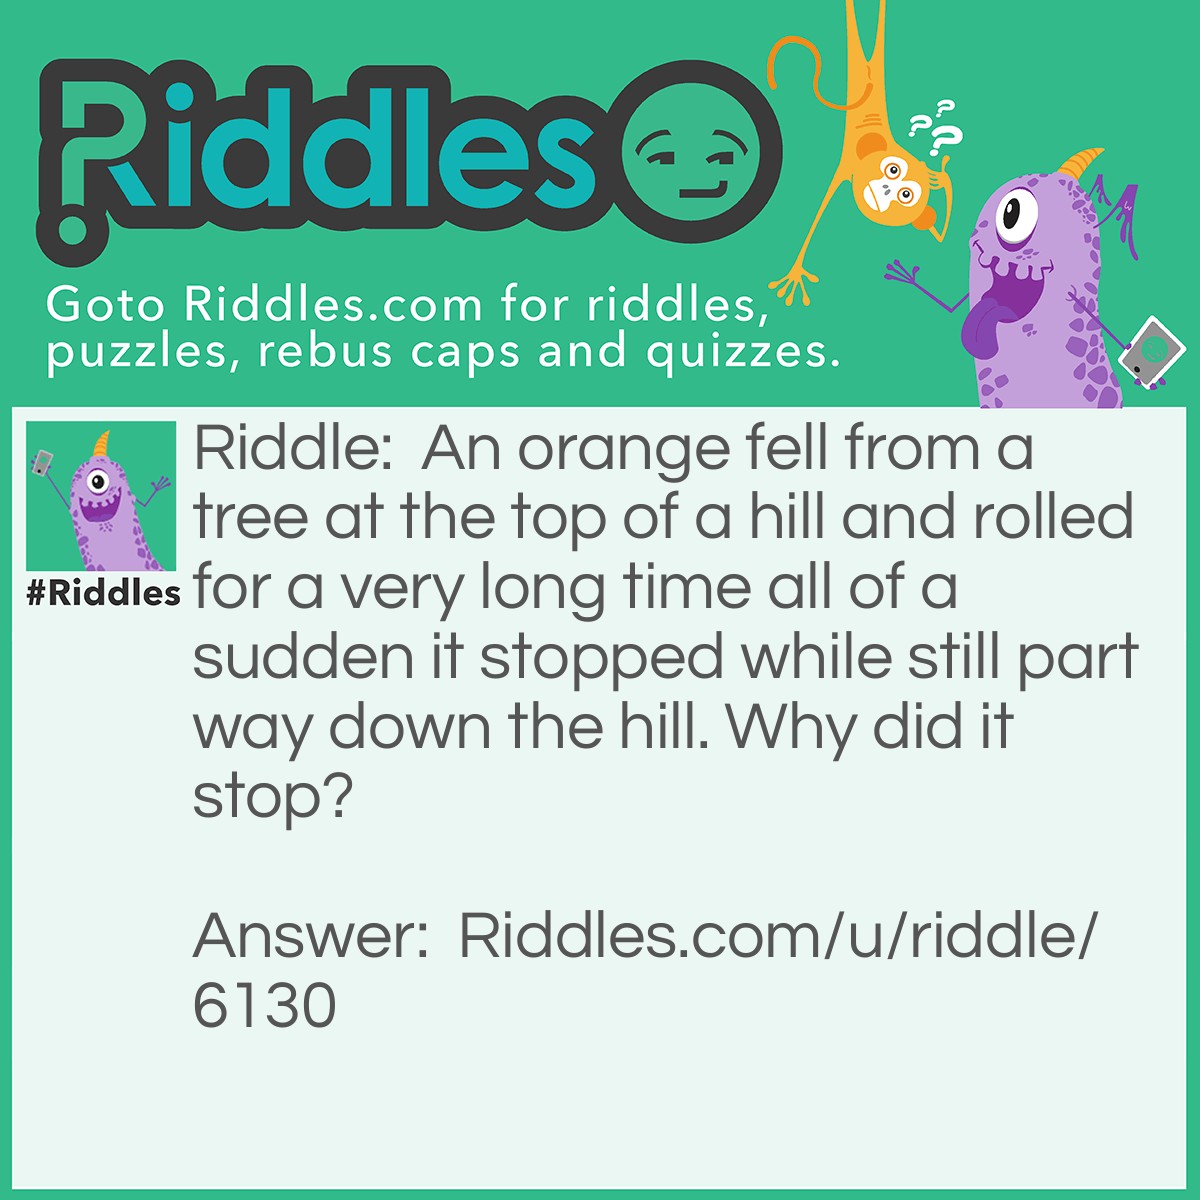 Riddle: An orange fell from a tree at the top of a hill and rolled for a very long time all of a sudden it stopped while still part way down the hill. Why did it stop? Answer: It ran out of juice.